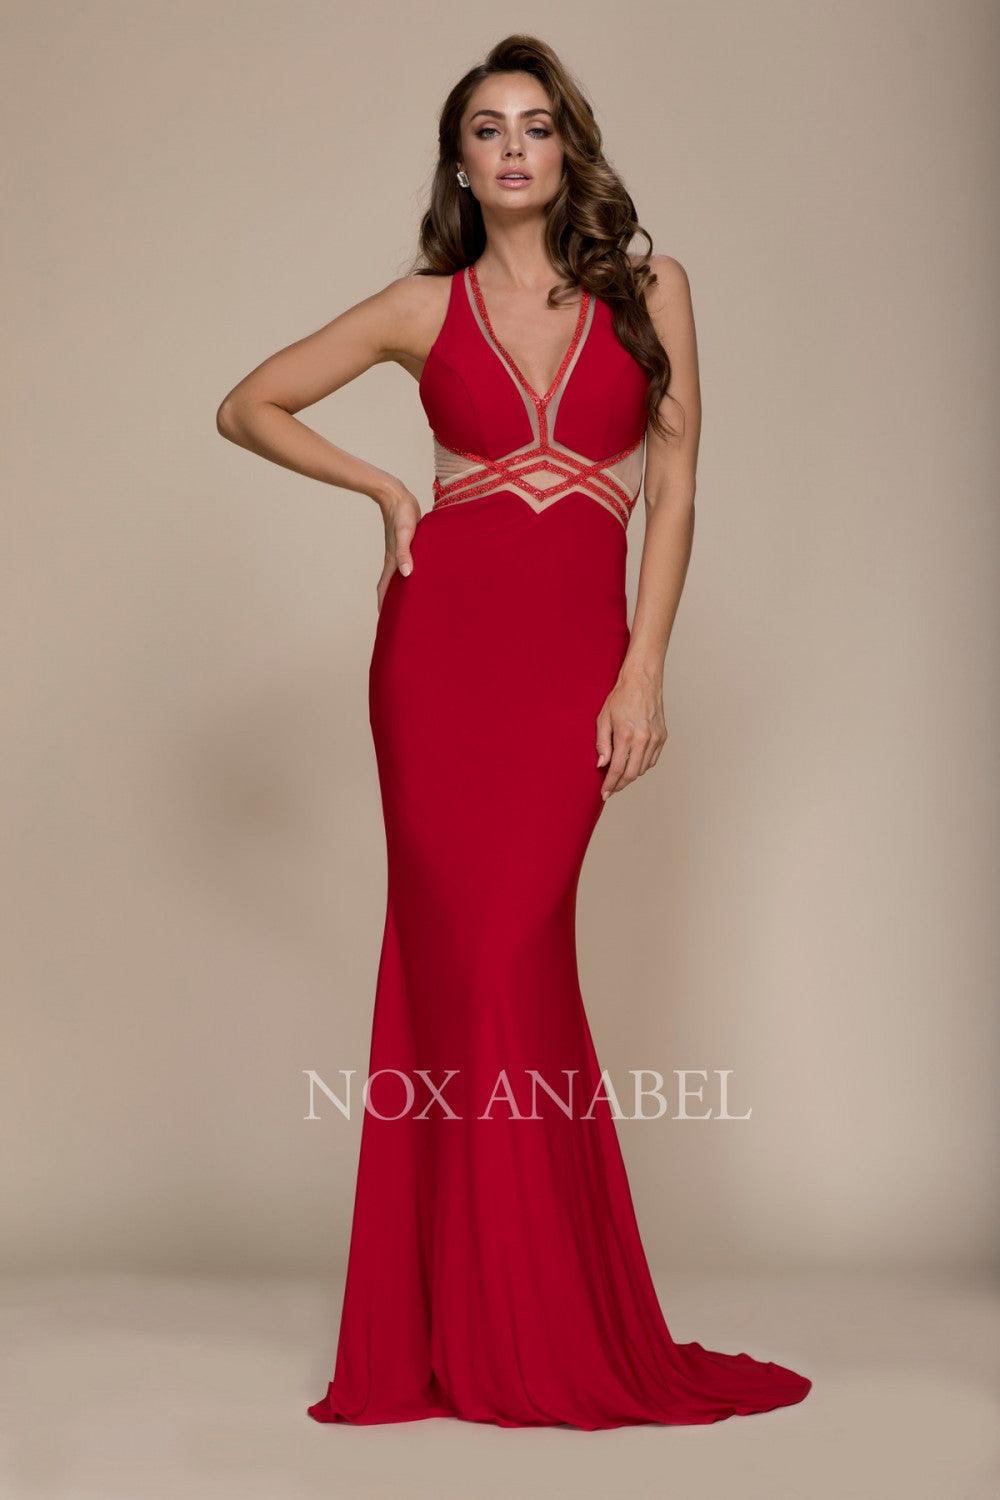 Long Open Back Side Prom Dress Evening Gown - The Dress Outlet Nox Anabel